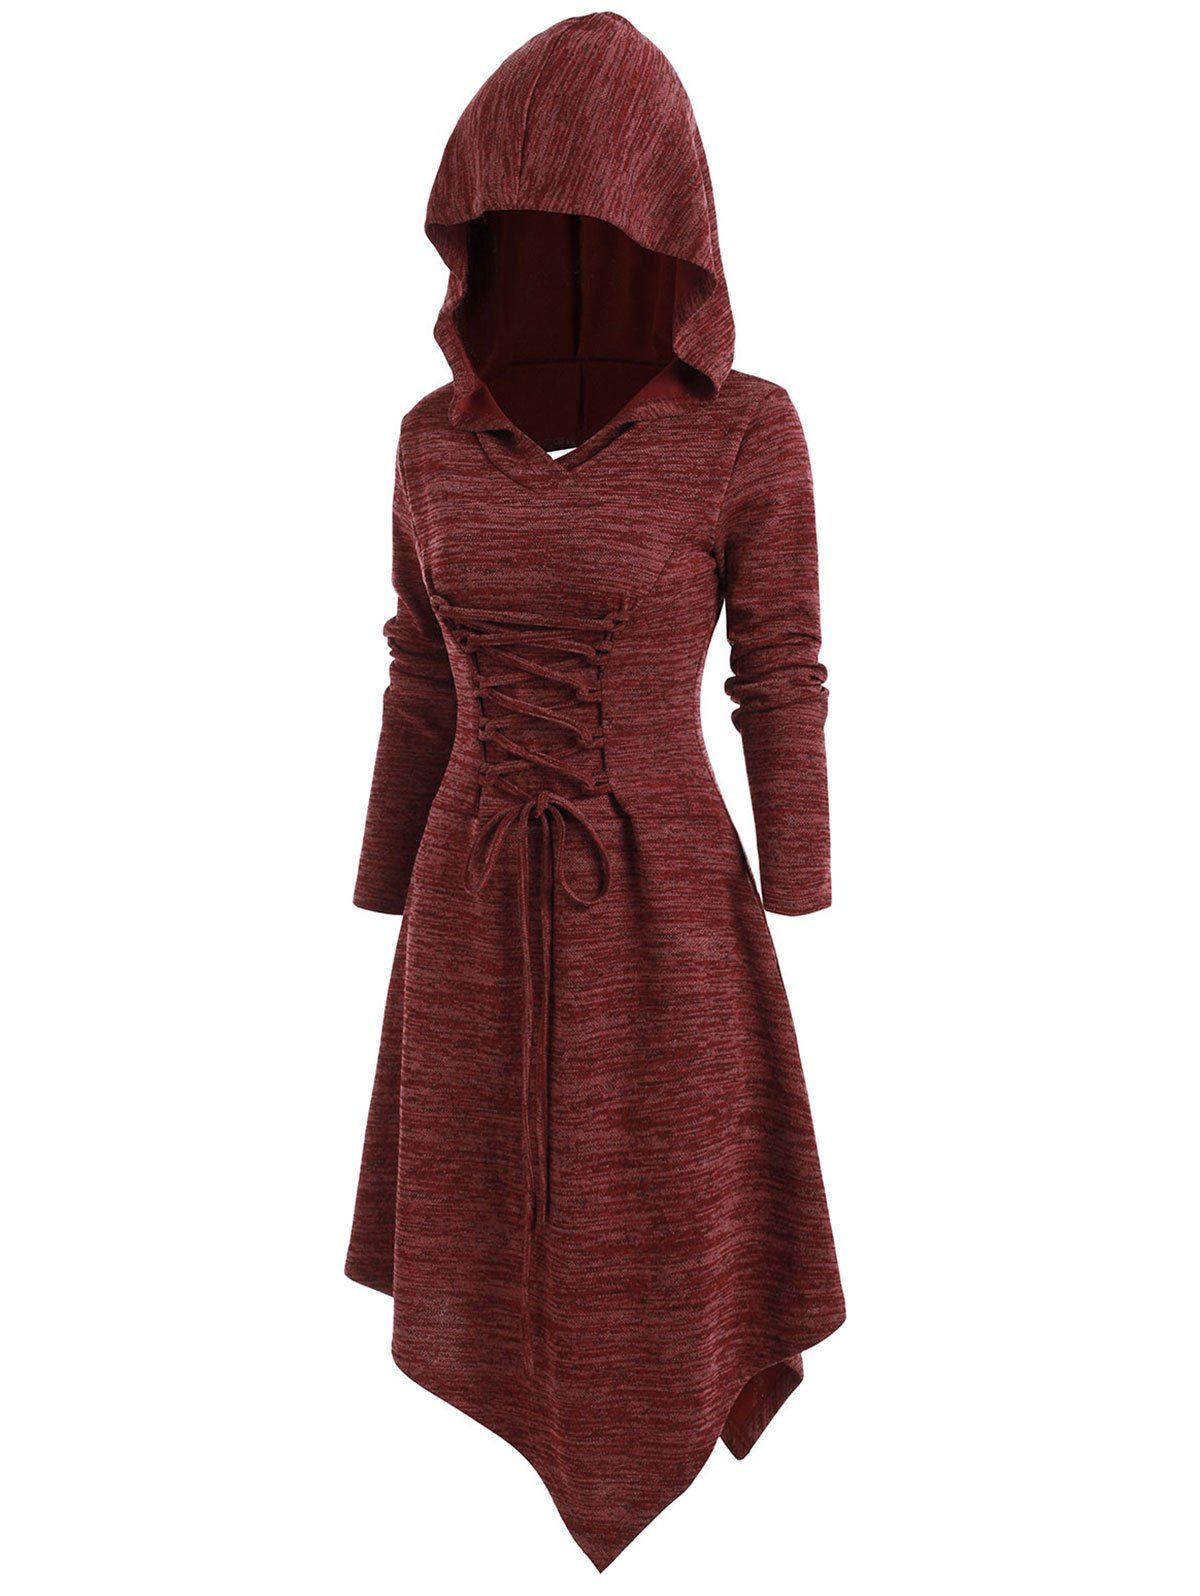 Lace Up Heathered Asymmetric Hooded Dress - RED WINE 2XL